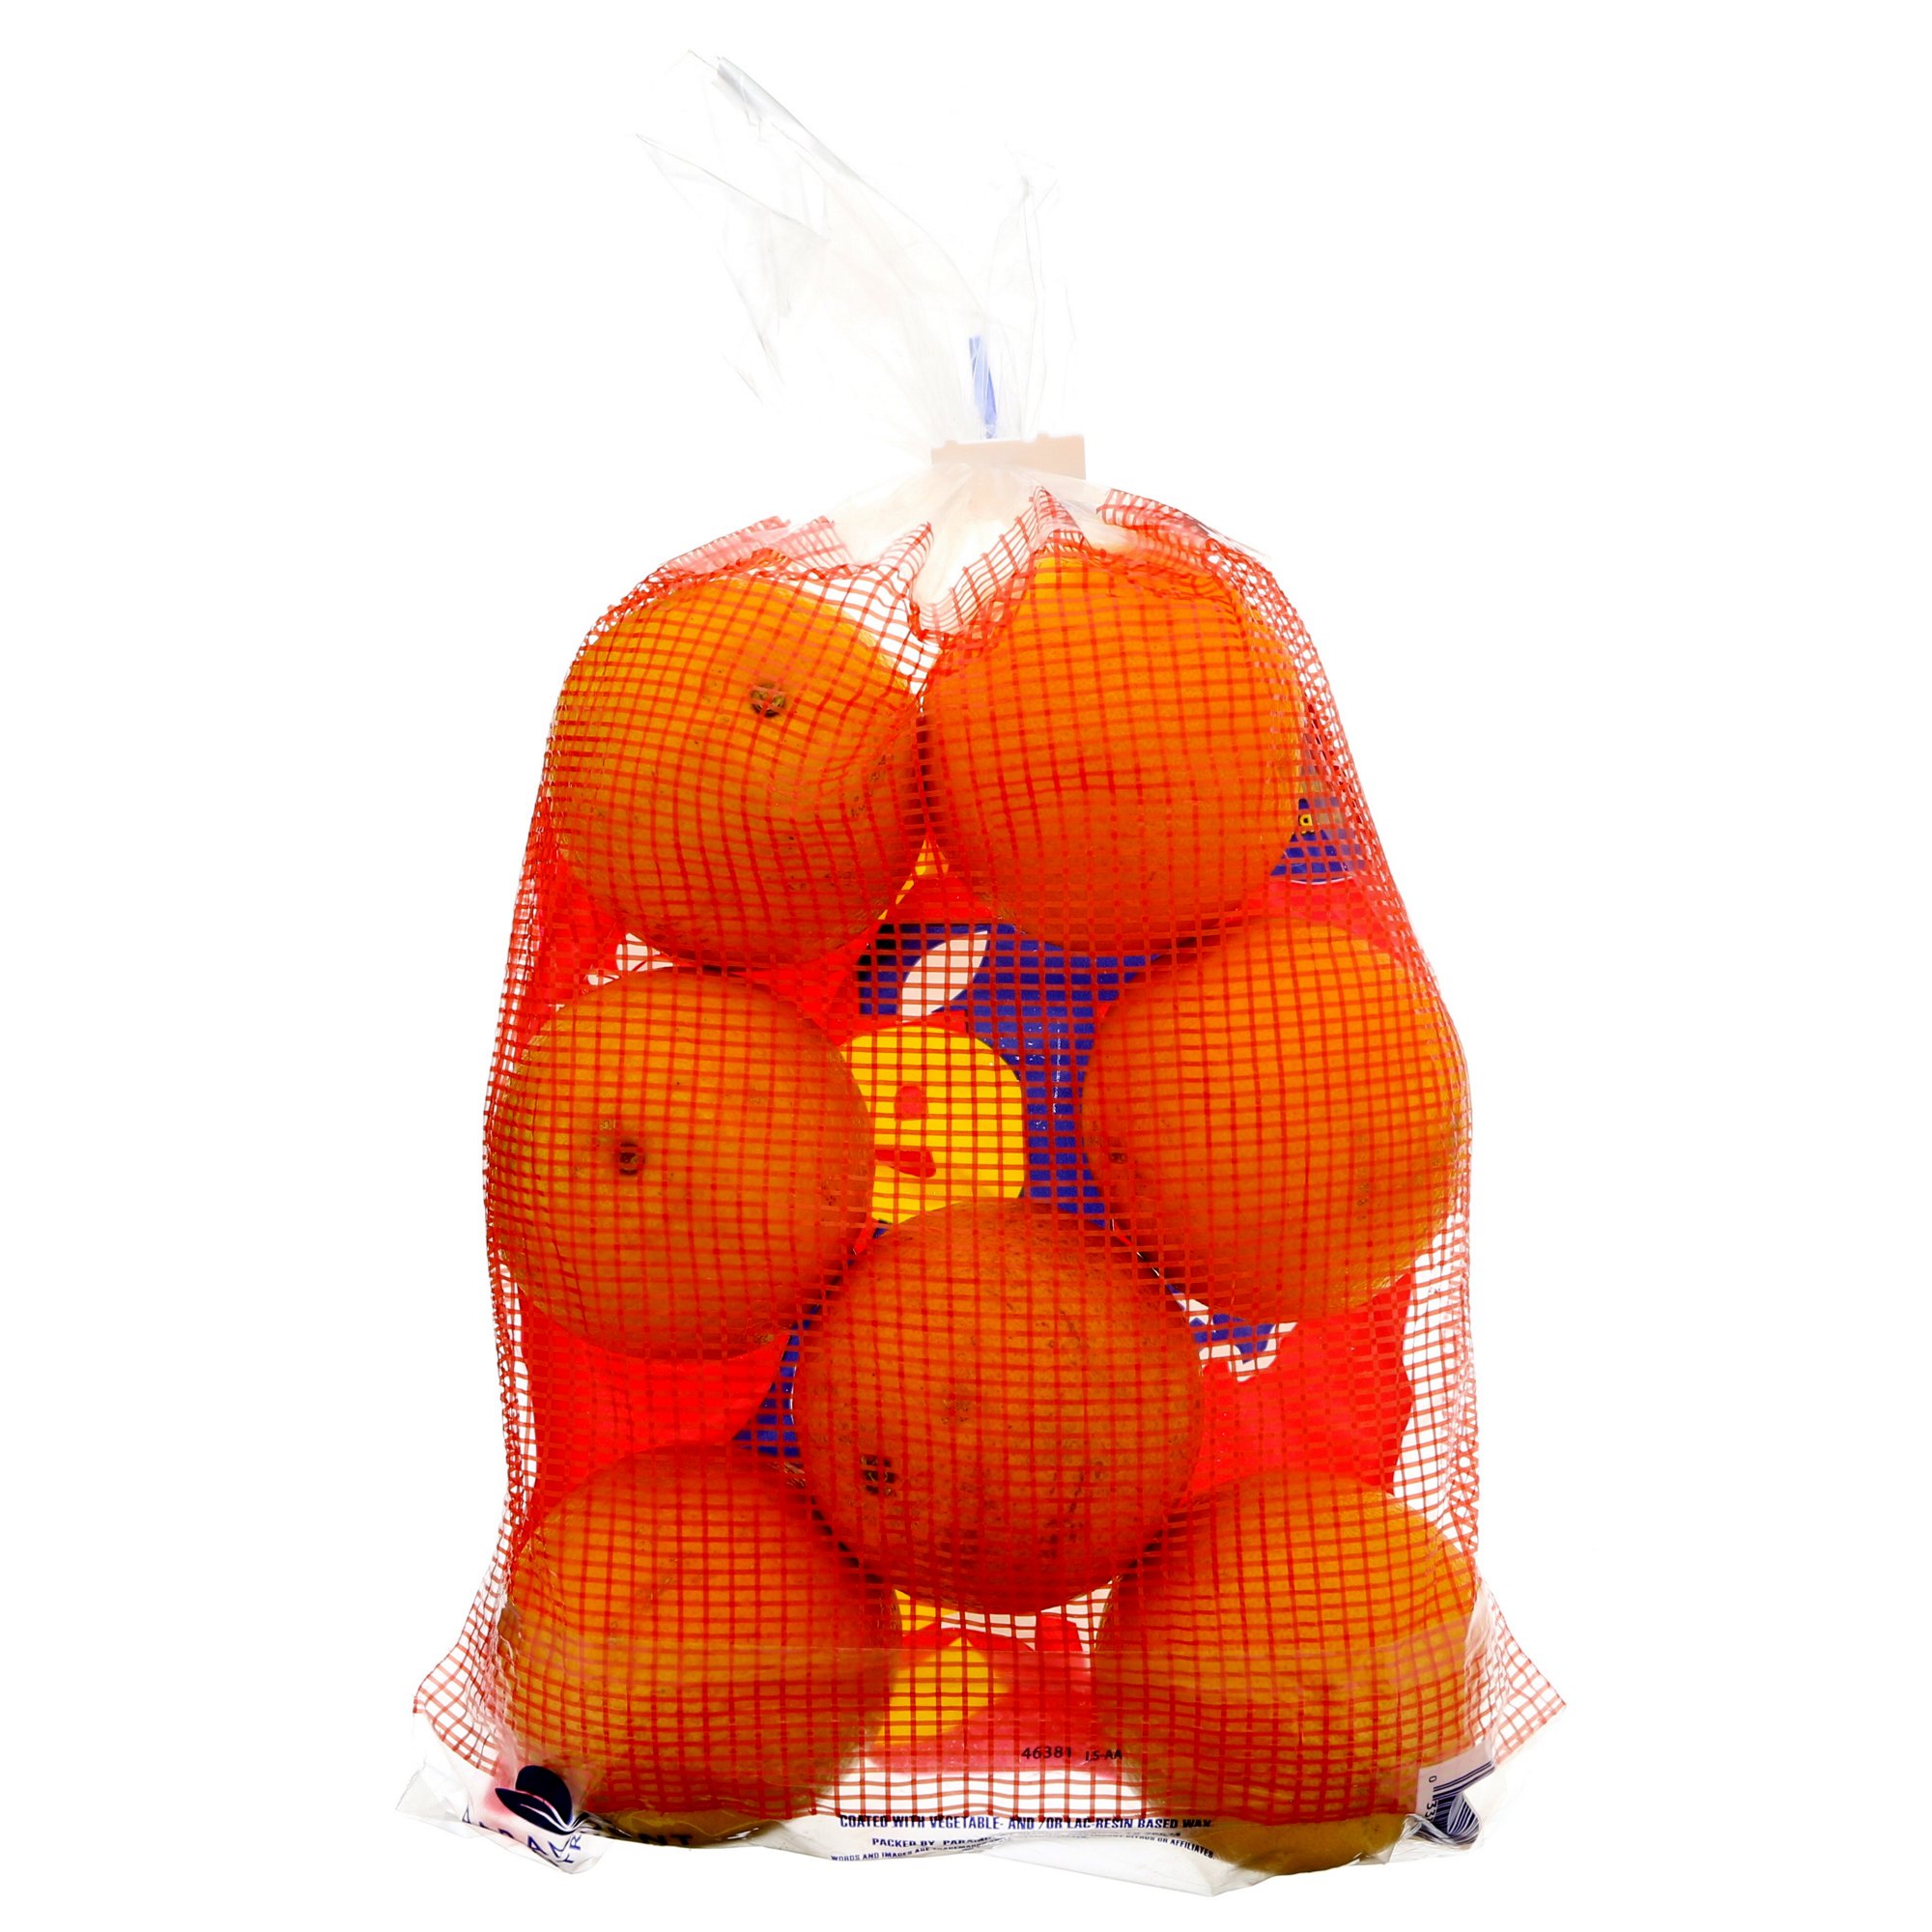 Oranges and Grapefruits - Shop HEB Everyday Low Prices Online